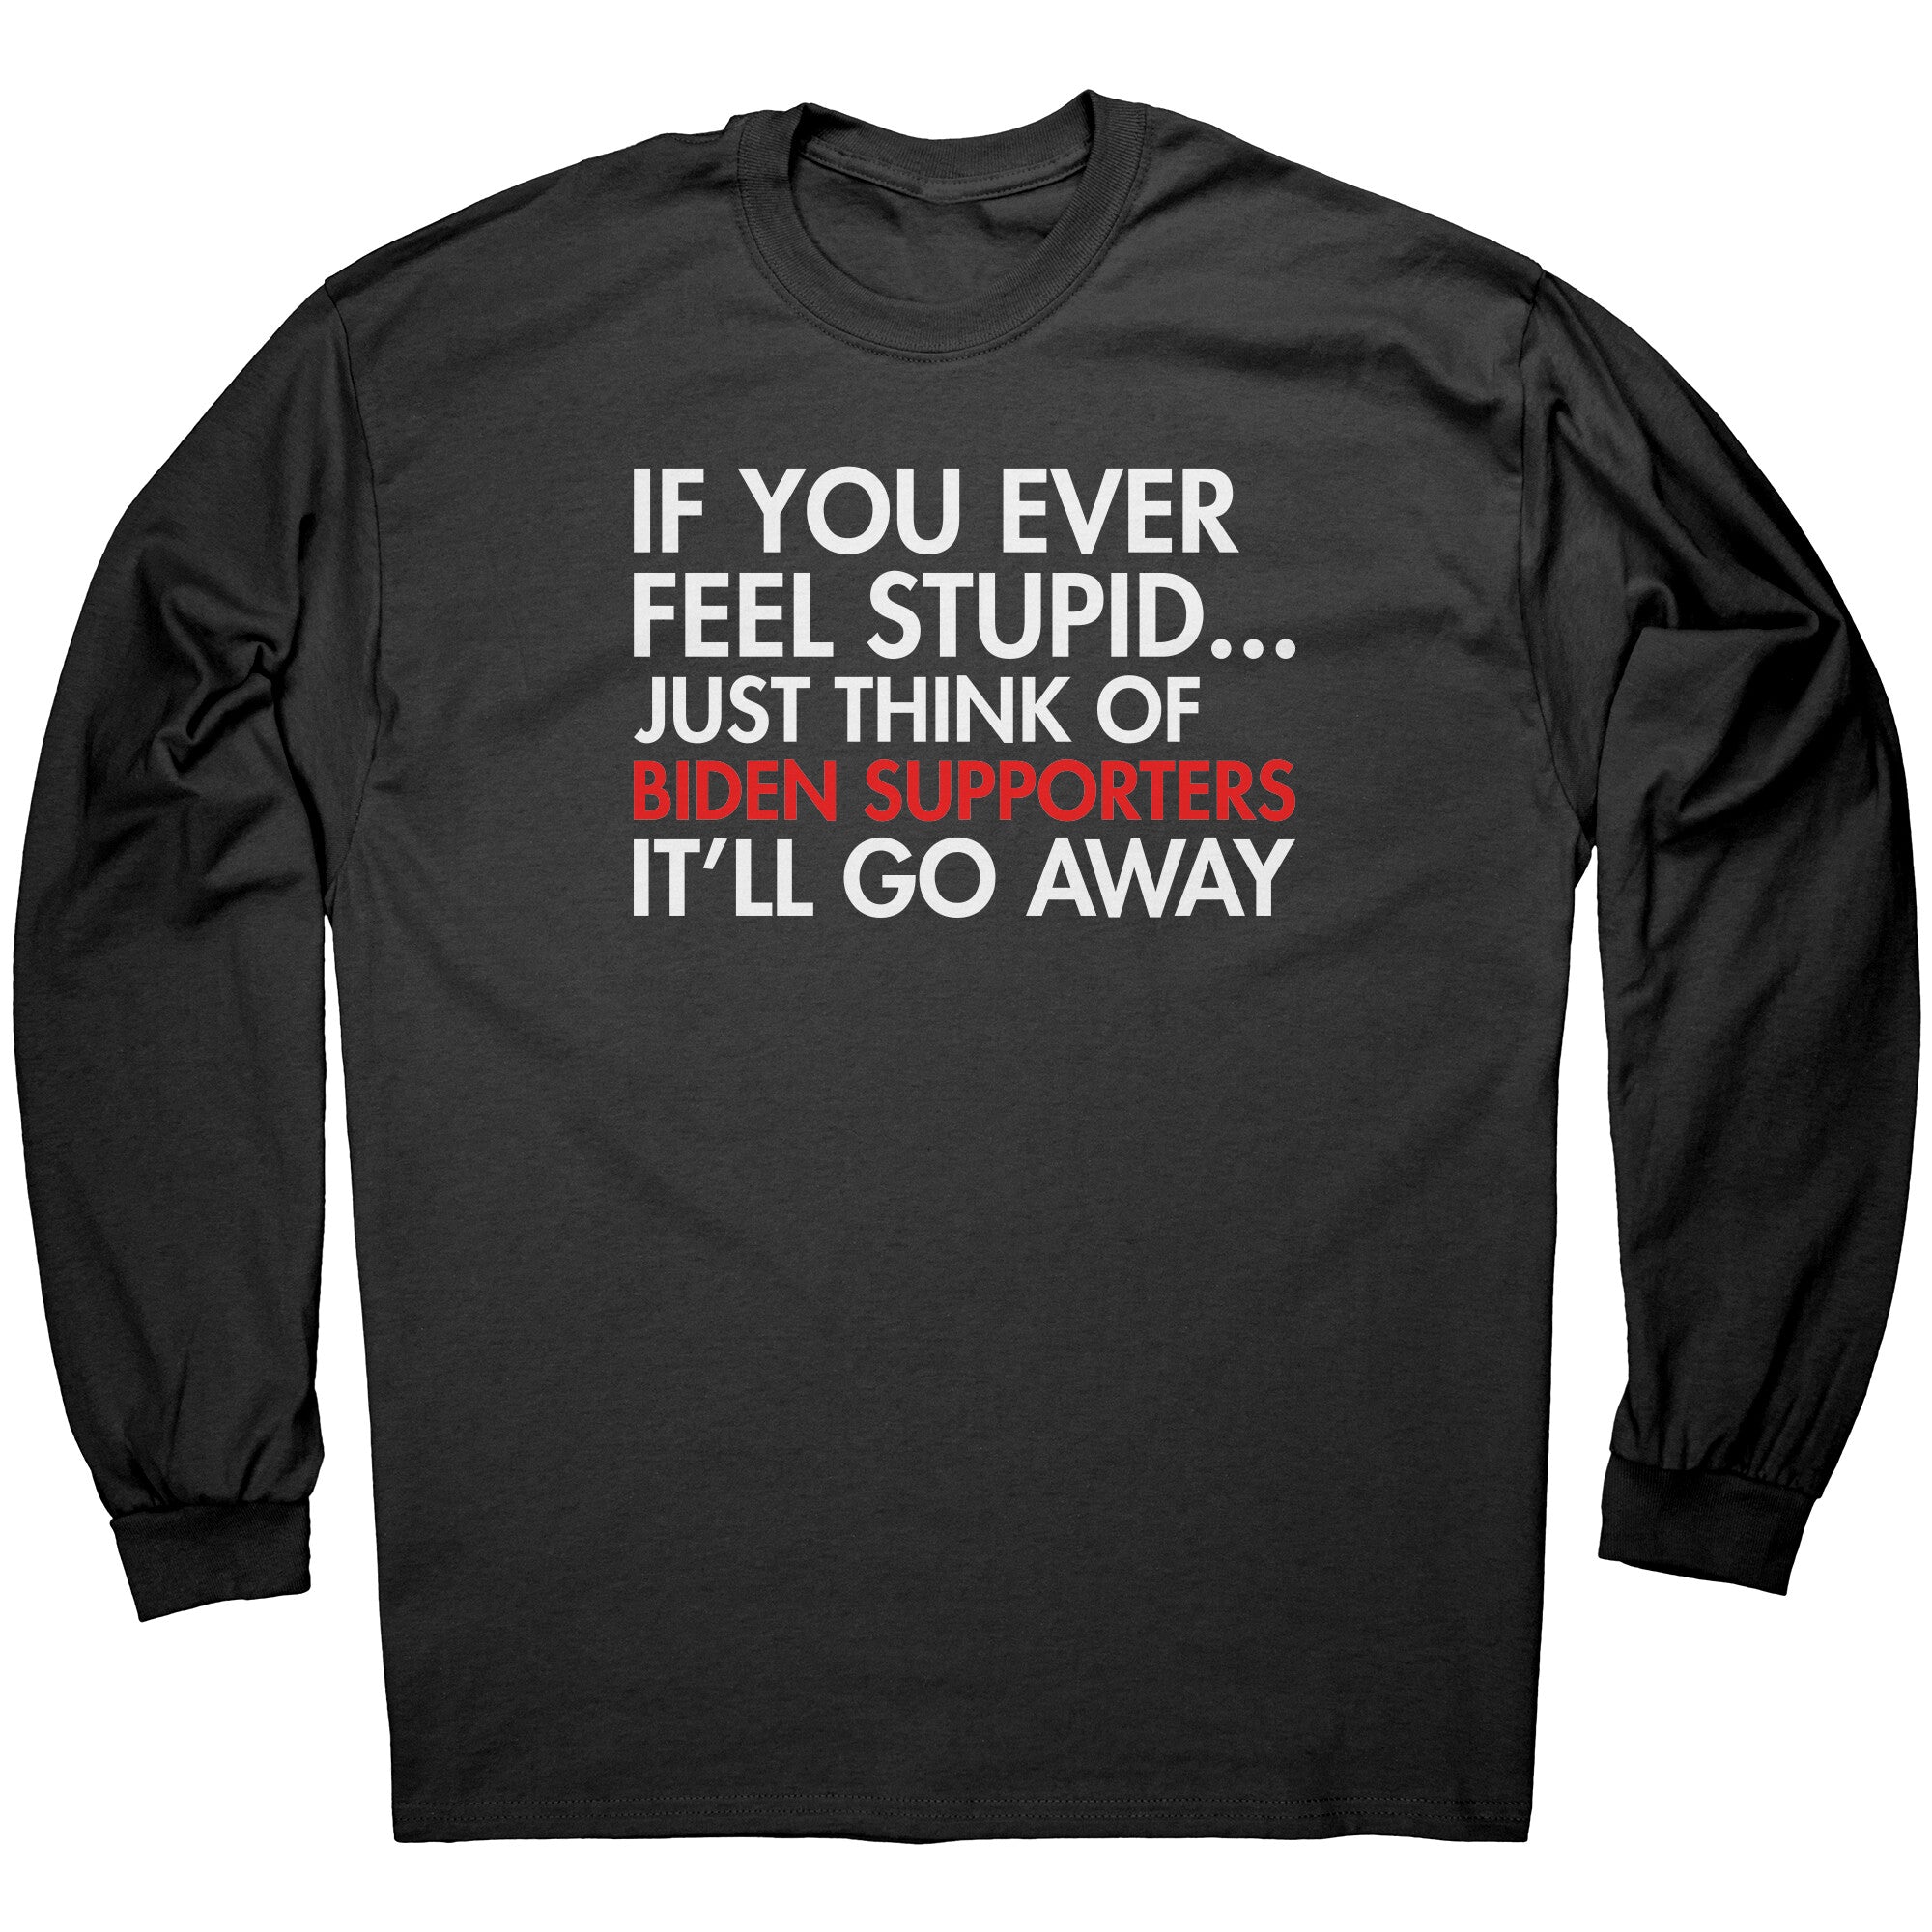 If You Ever Feel Stupid Just Think Of Biden Supporters It'll Go Away -Apparel | Drunk America 